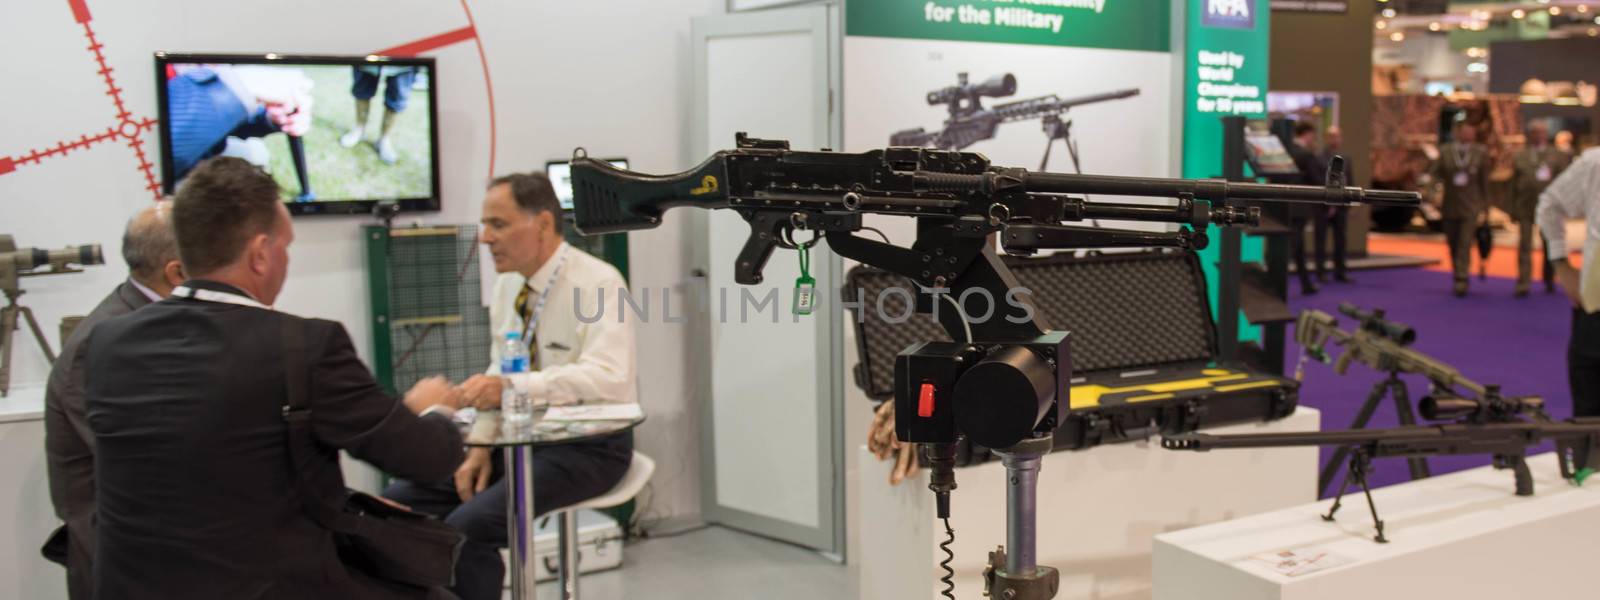 UNITED KINGDOM, London: Large Gun	The Defence and Security International Exhibition (DSEI) began in London on September 15, 2015 despite a week of direct action protests by peace campaigners.  	The arms fair has seen over 30,000 people descend on London to see the 1,500 exhibitors who are displaying weapons of war from pistols and rifles up to tanks, assault helicopters and warships.  	Protesters attempted to block the main road into the exhibition, claiming that such an event strengthened the UK's ties to human rights abuses. 